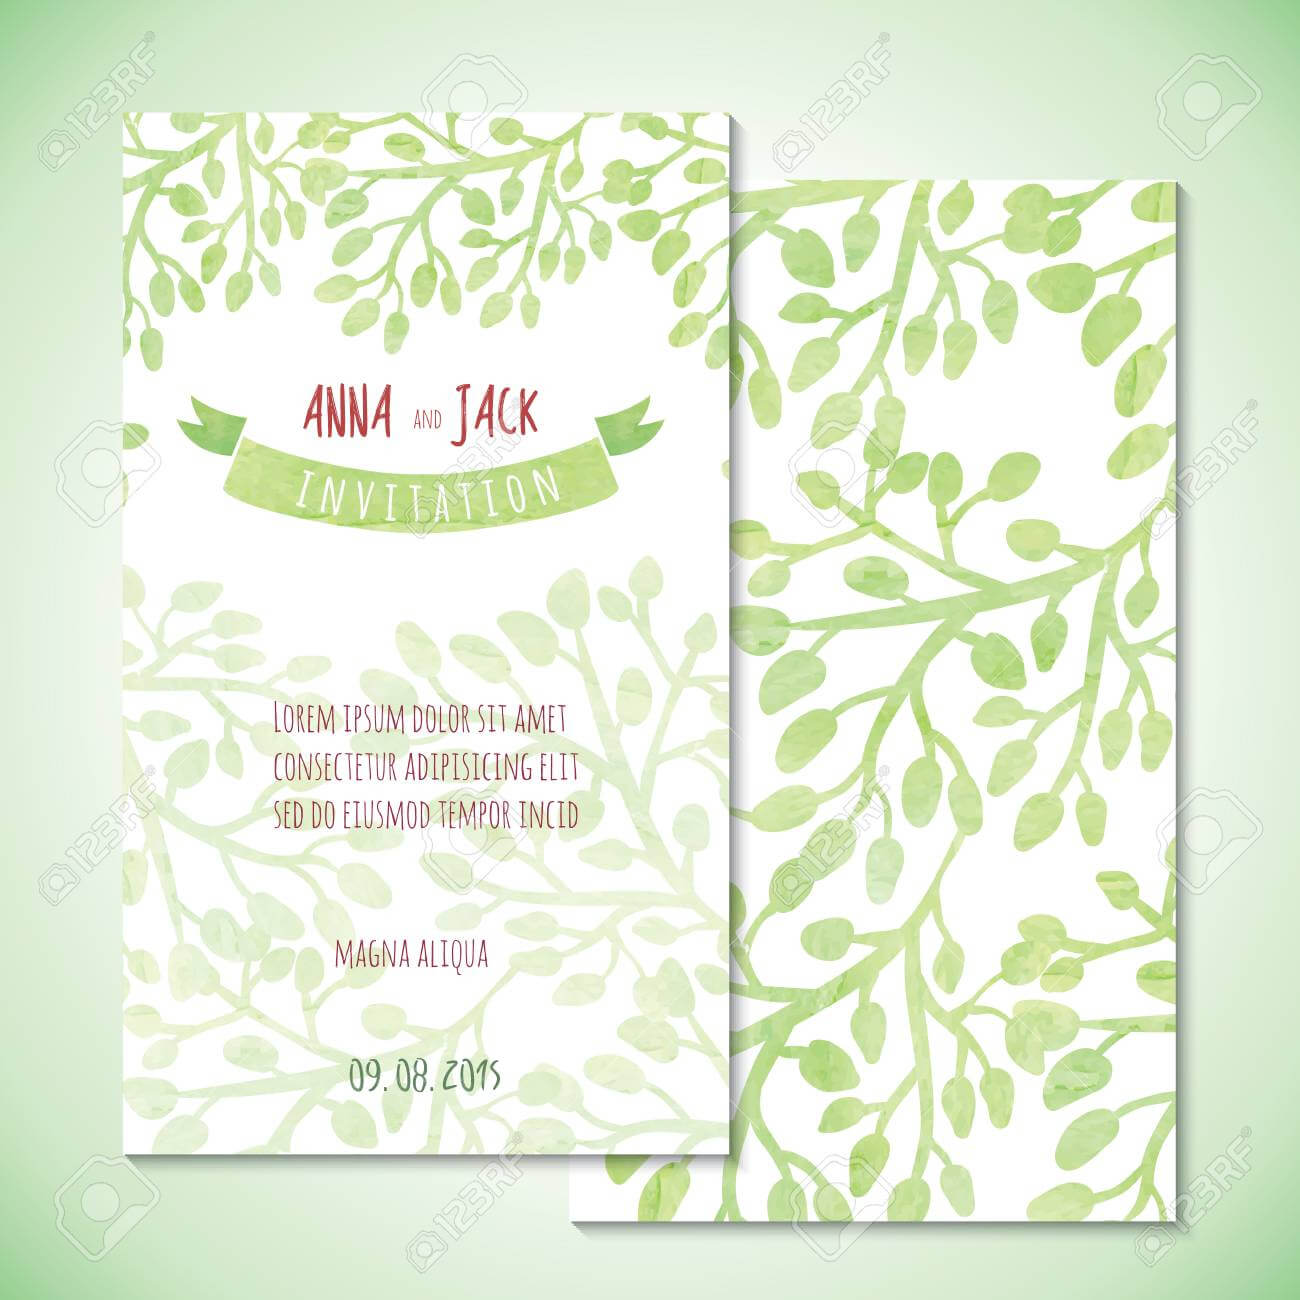 Watercolor Card Templates For Wedding Invitation, Save The Date.. Throughout Save The Date Cards Templates